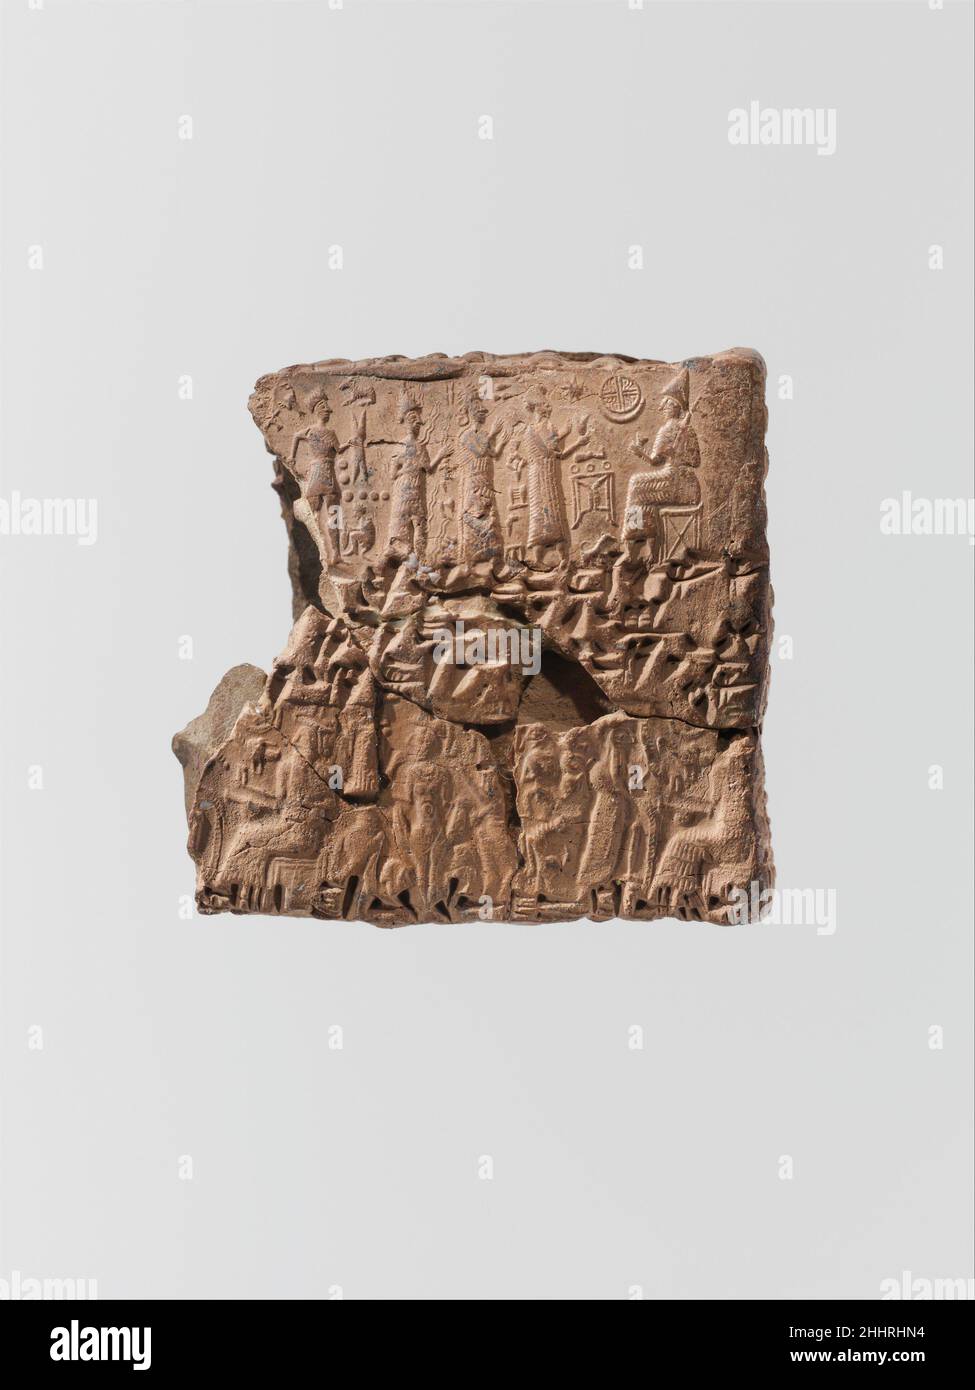 Cuneiform tablet case impressed with four cylinder seals in Anatolian and Old Assyrian style, for cuneiform tablet 66.245.16a: quittance for a loan in silver ca. 20th–19th century B.C. Old Assyrian Trading Colony Kültepe, the ancient city of Kanesh, was part of the network of trading settlements established in central Anatolia by merchants from Ashur (in Assyria in northern Mesopotamia) in the early second millennium B.C. Travelling long distances, and often living separately from their families, these merchants traded vast quantities of goods, primarily tin and textiles, for Anatolian copper Stock Photo